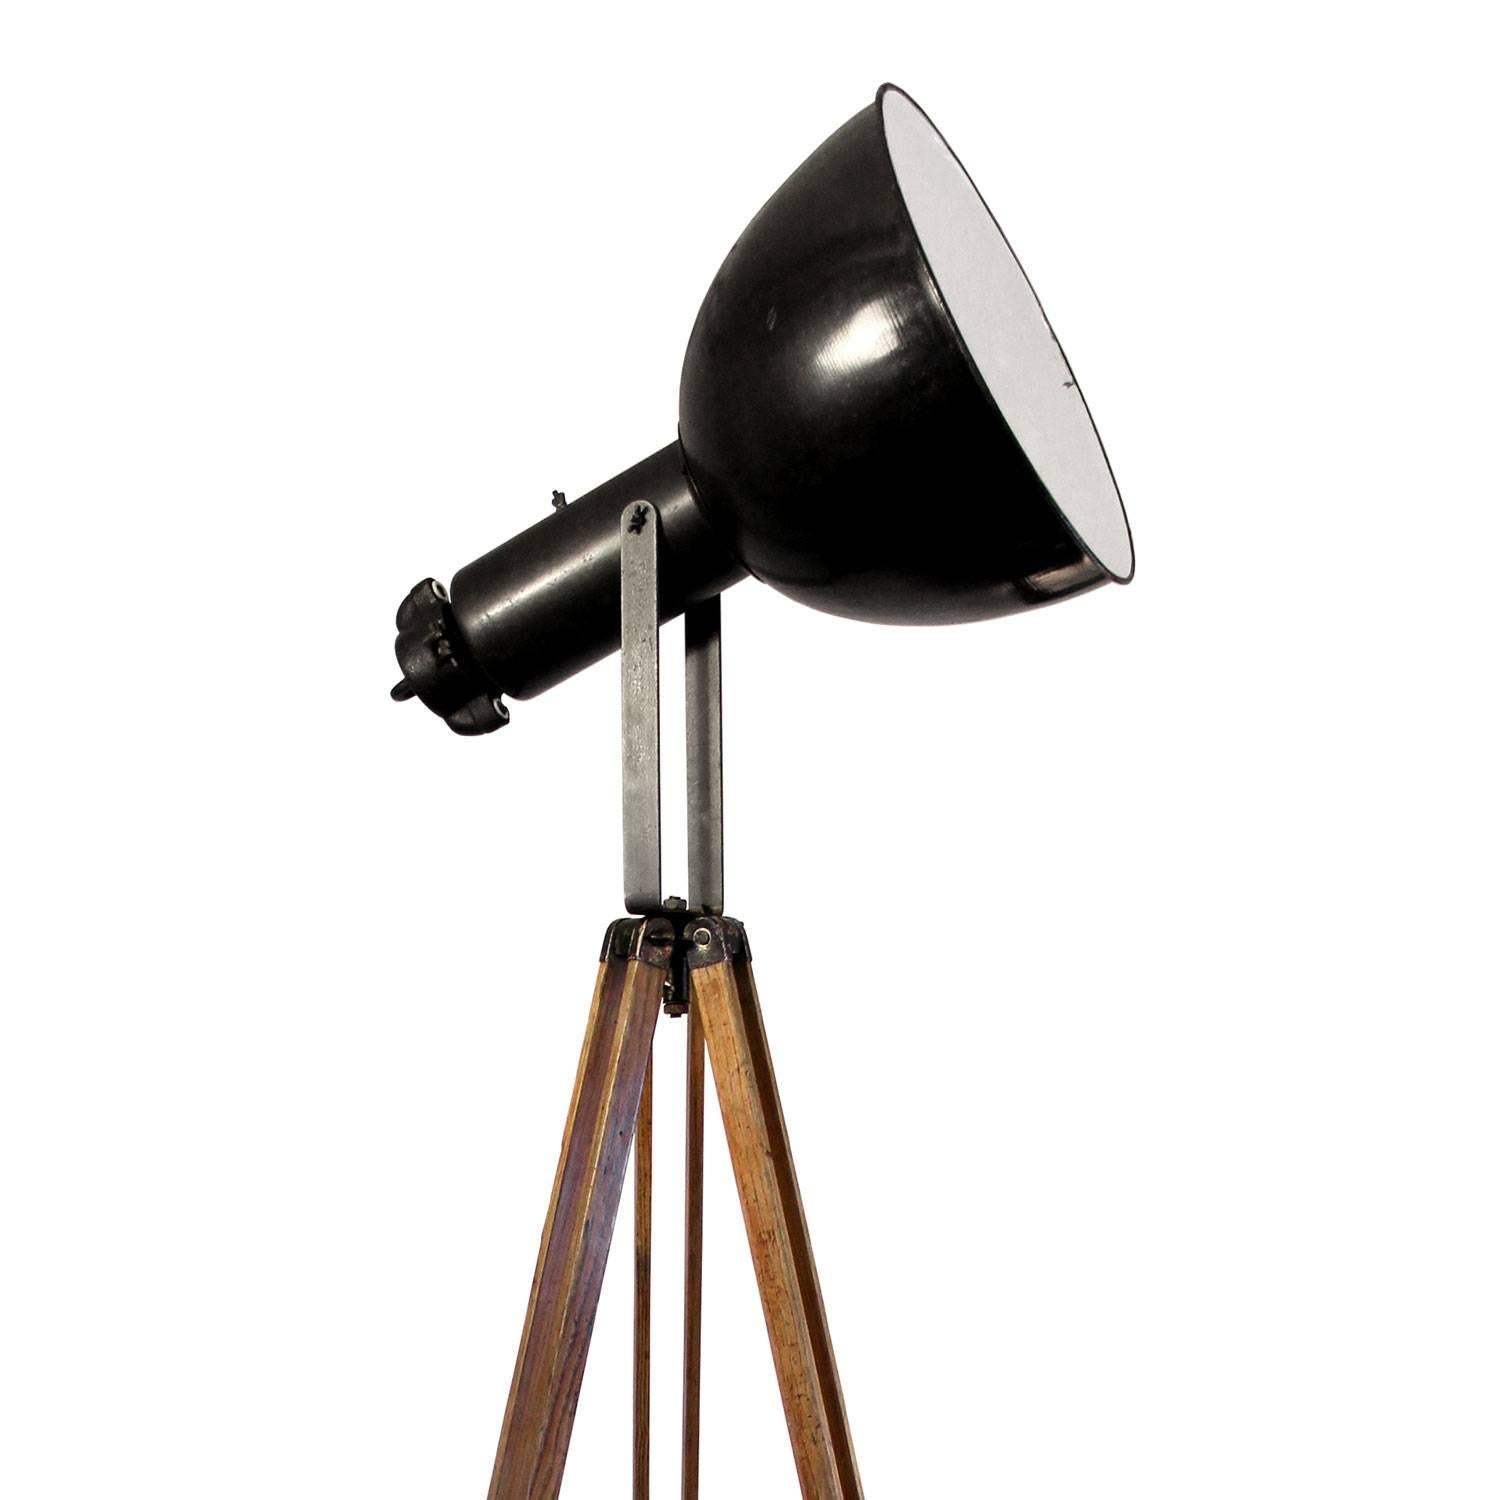 Vintage Industrial spotlight on wooden tripod. 
Adjustable height and angle. Black enamel spot with white interior. 
Measures: Diameter 42 cm. Total height as shown in picture: 195 cm. 

Weight: 13.00 kg / 28.7 lb

Priced per individual item.